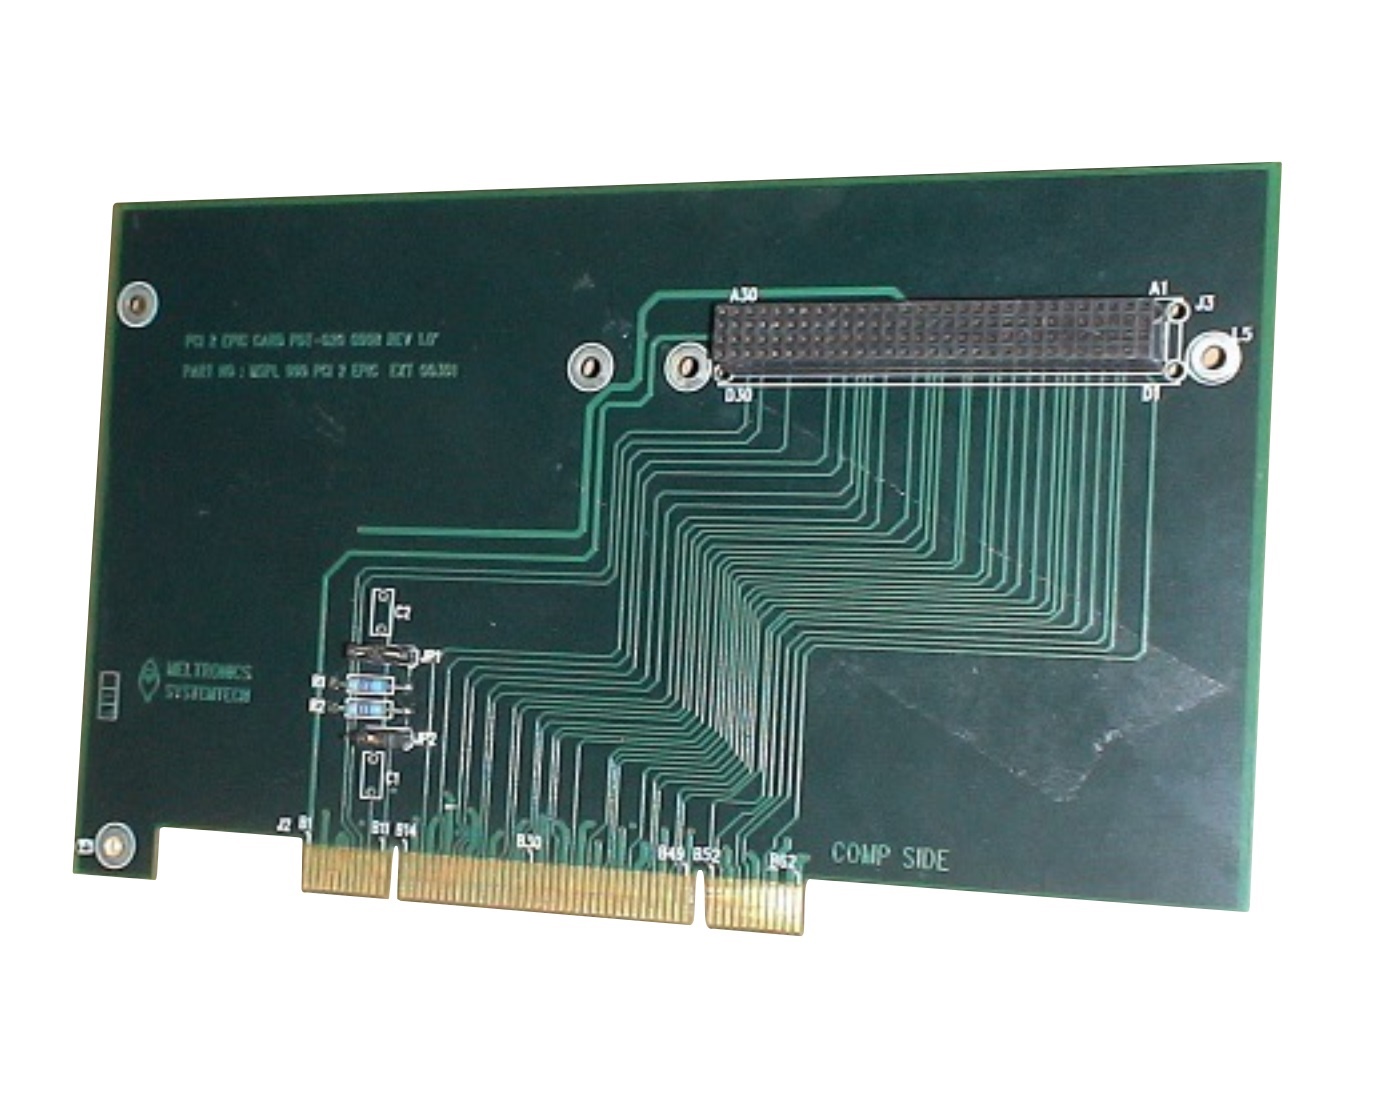 PCI-to-PC104-Extender-Board